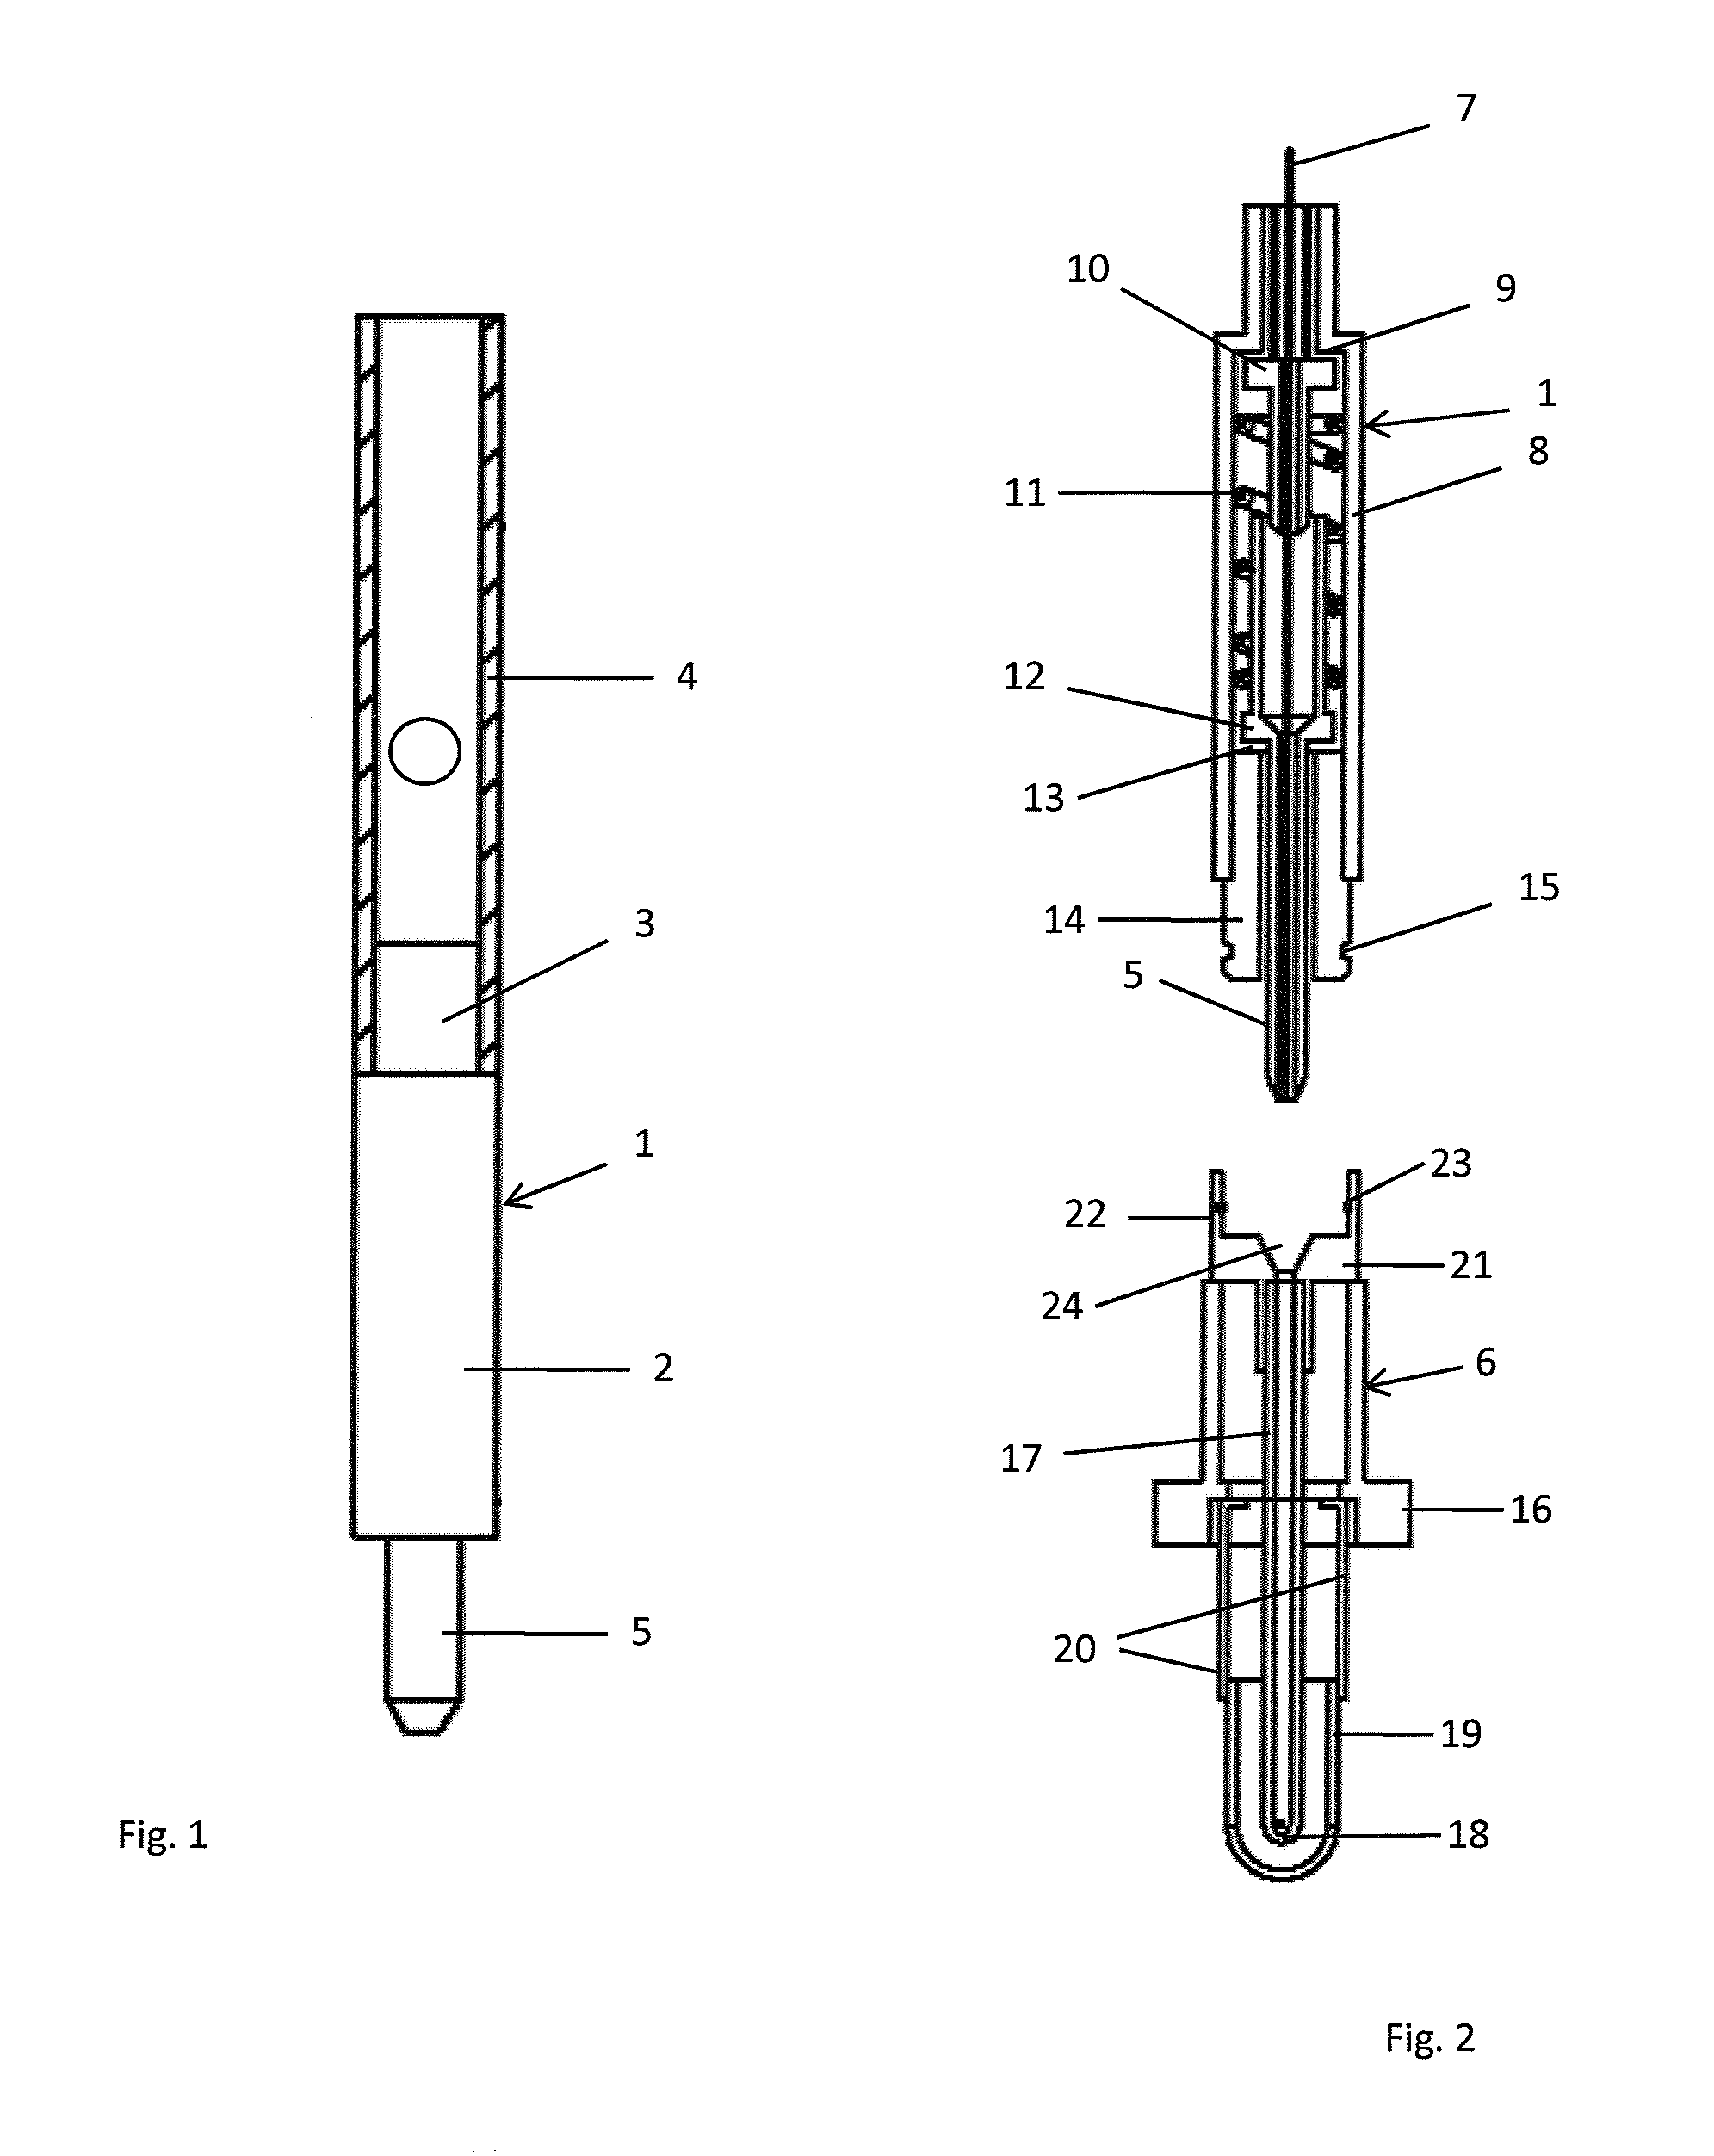 Sensor arrangement for the measuring of parameters in melted material